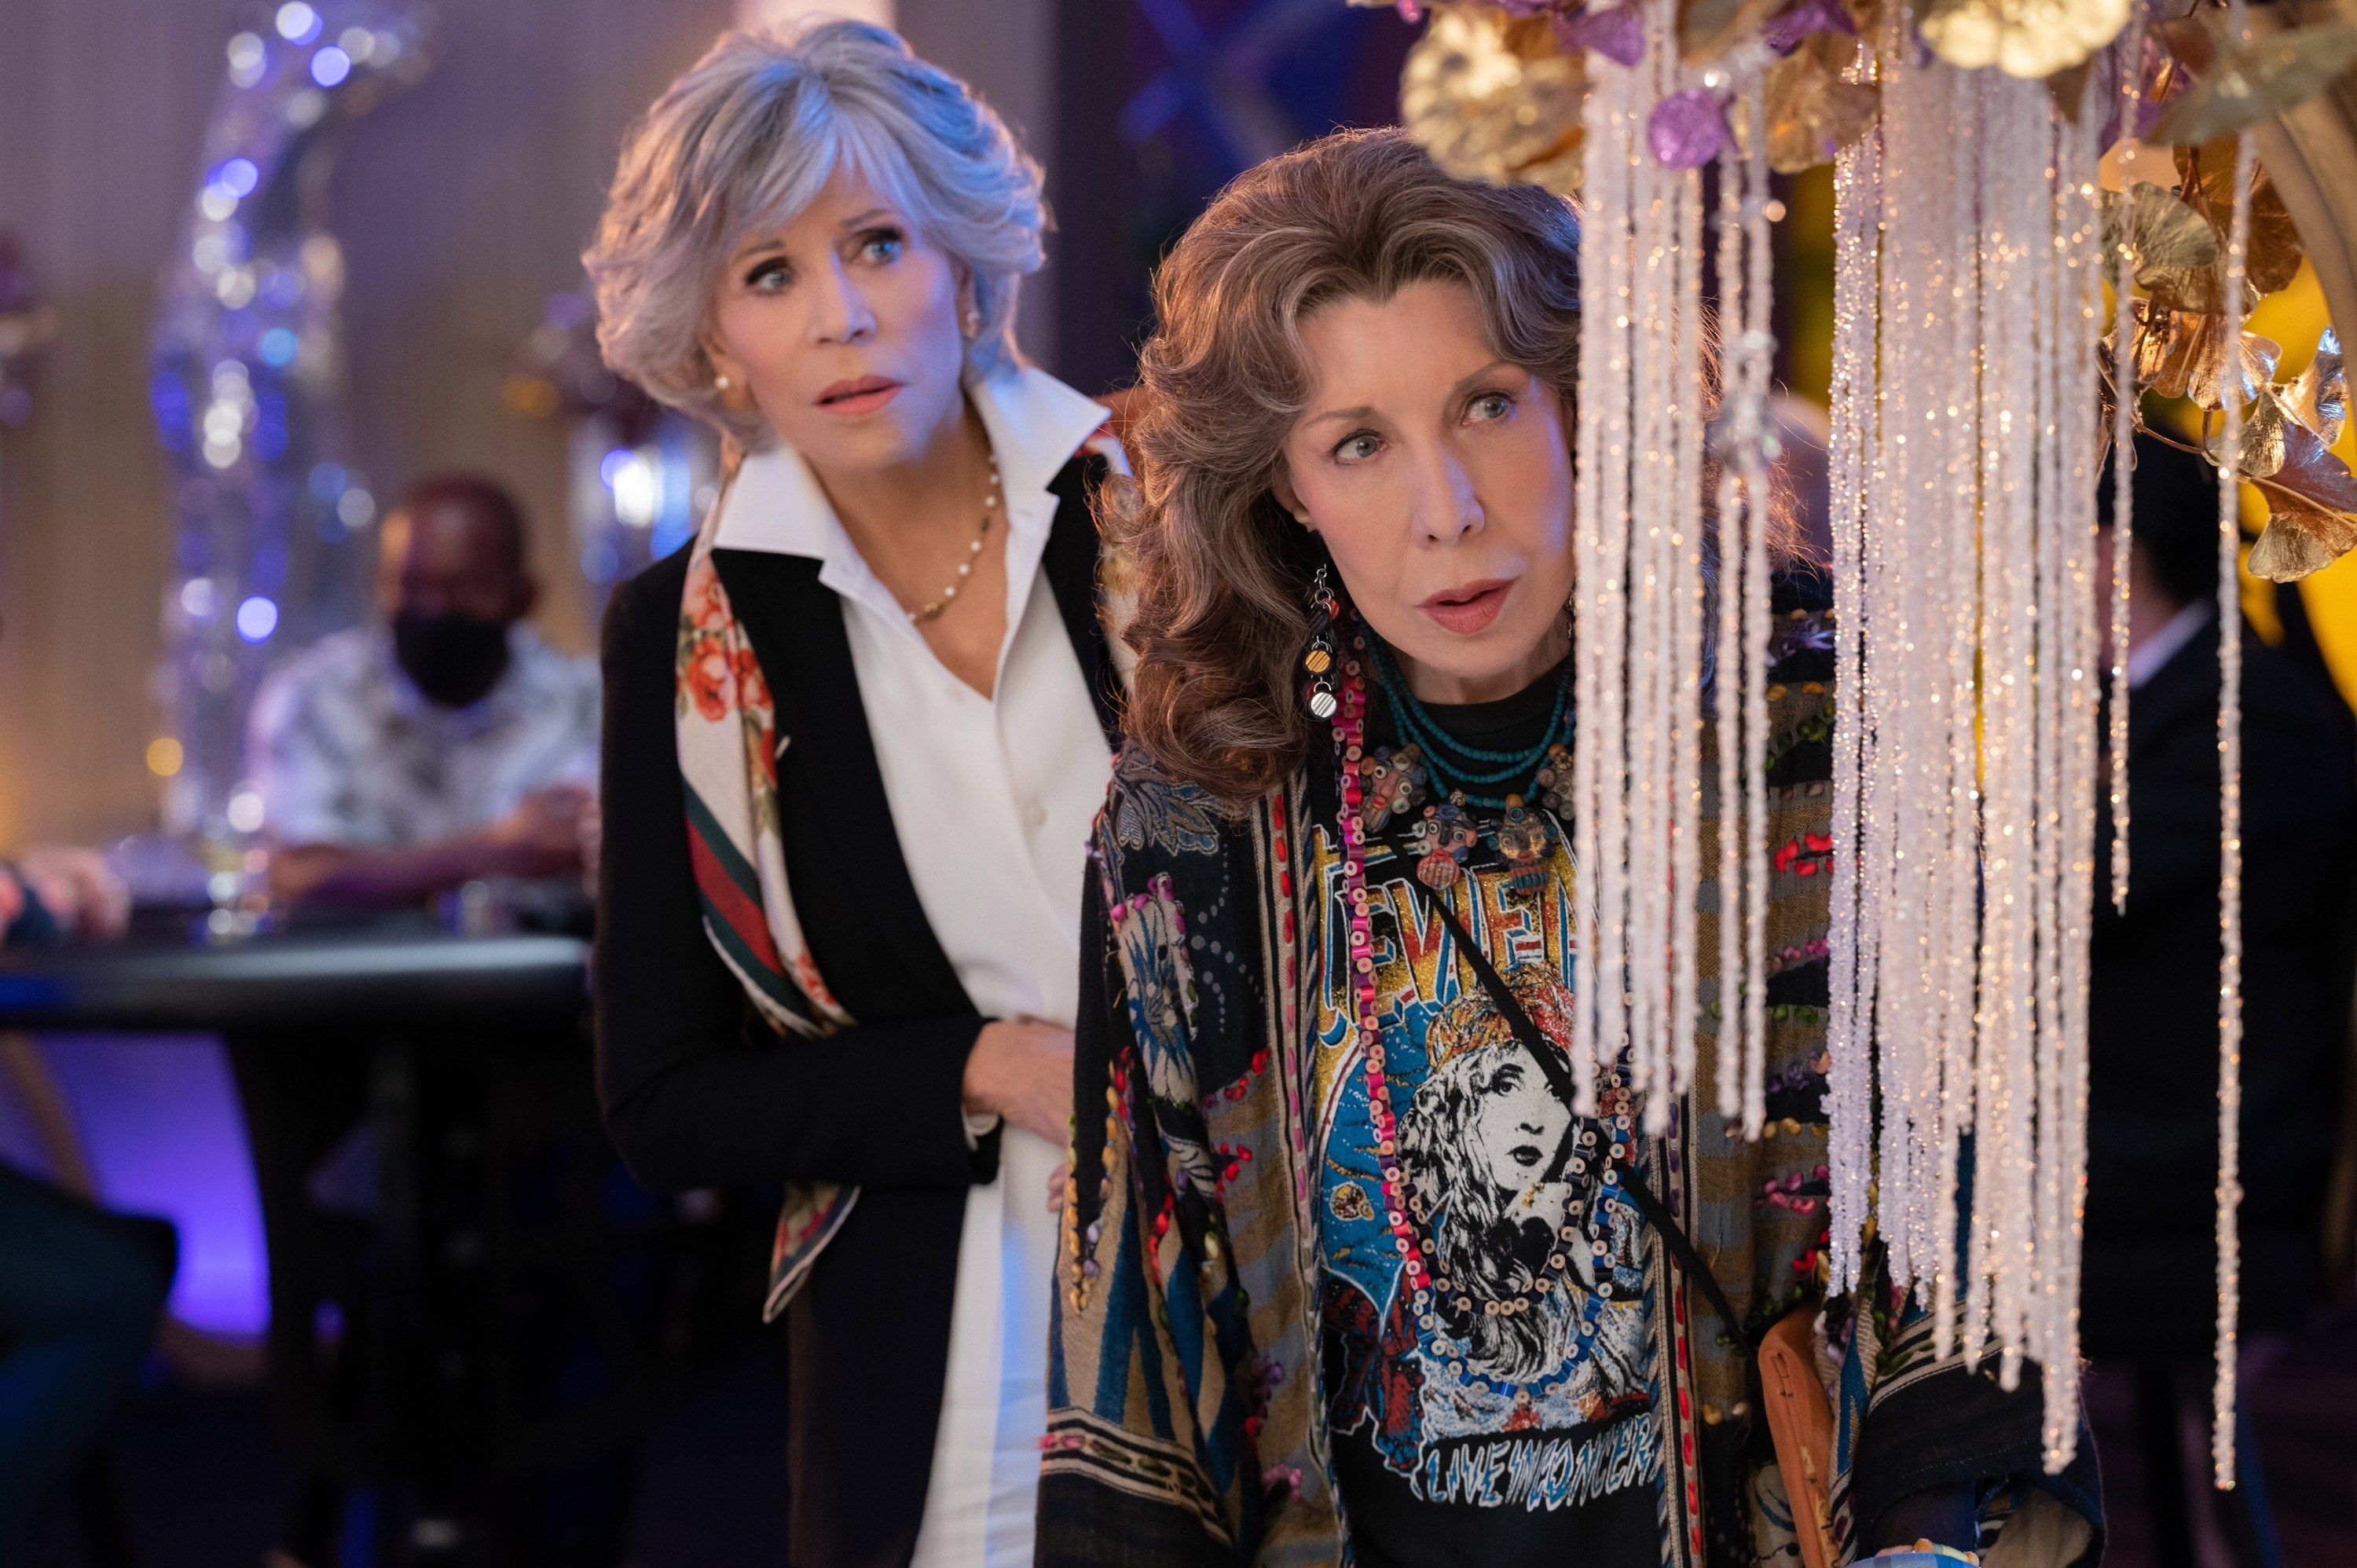 Jane Fonda and Lily Tomlin in Grace and Frankie